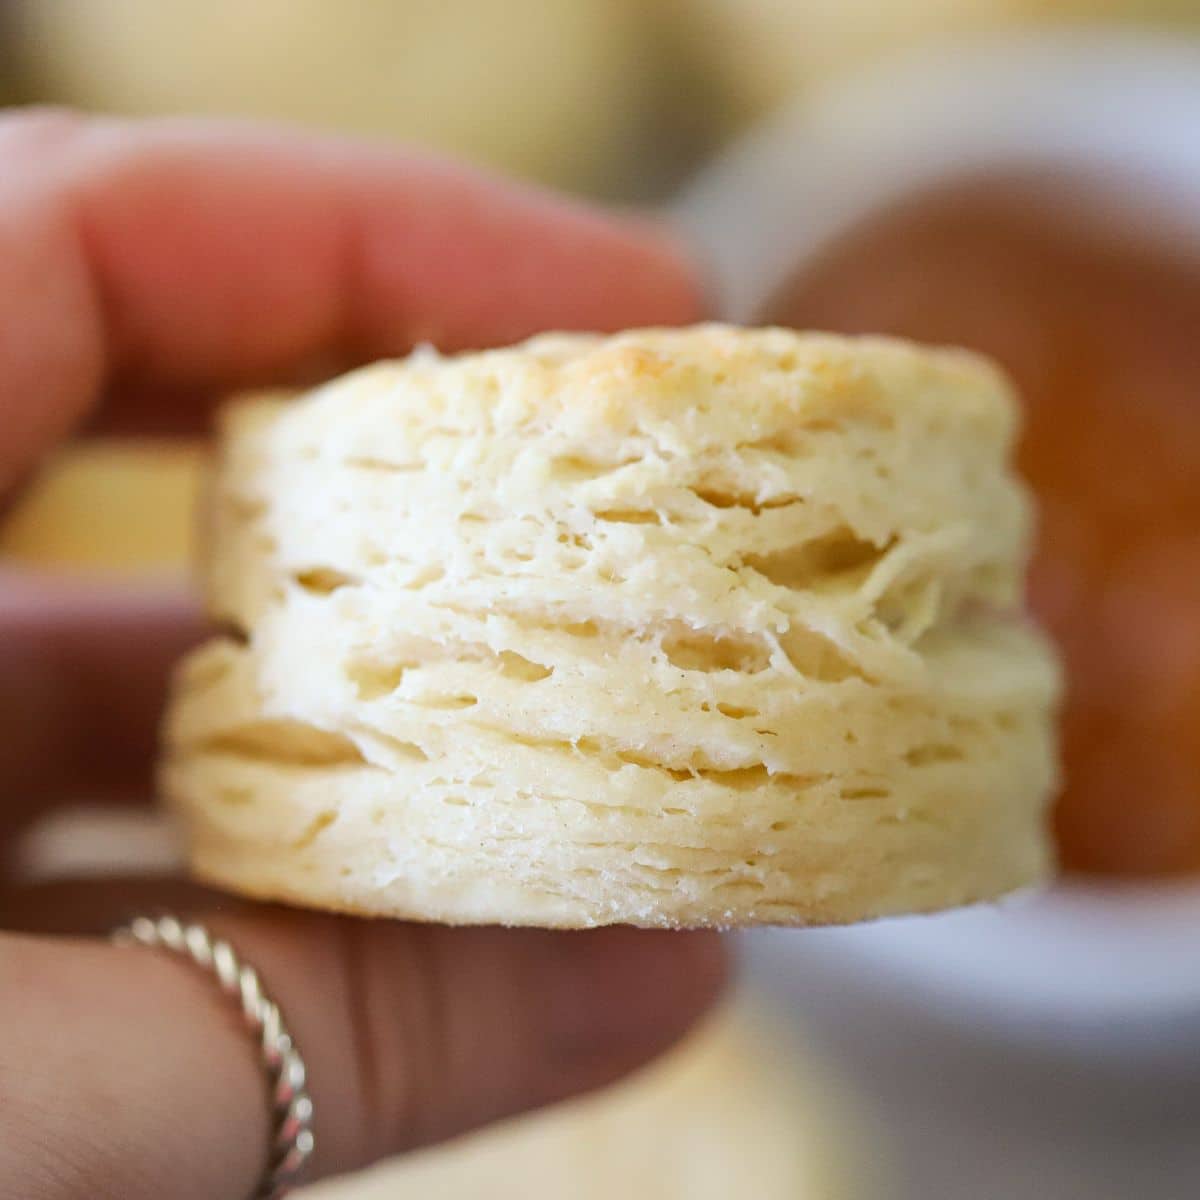 a homemade flakey biscuit being held up